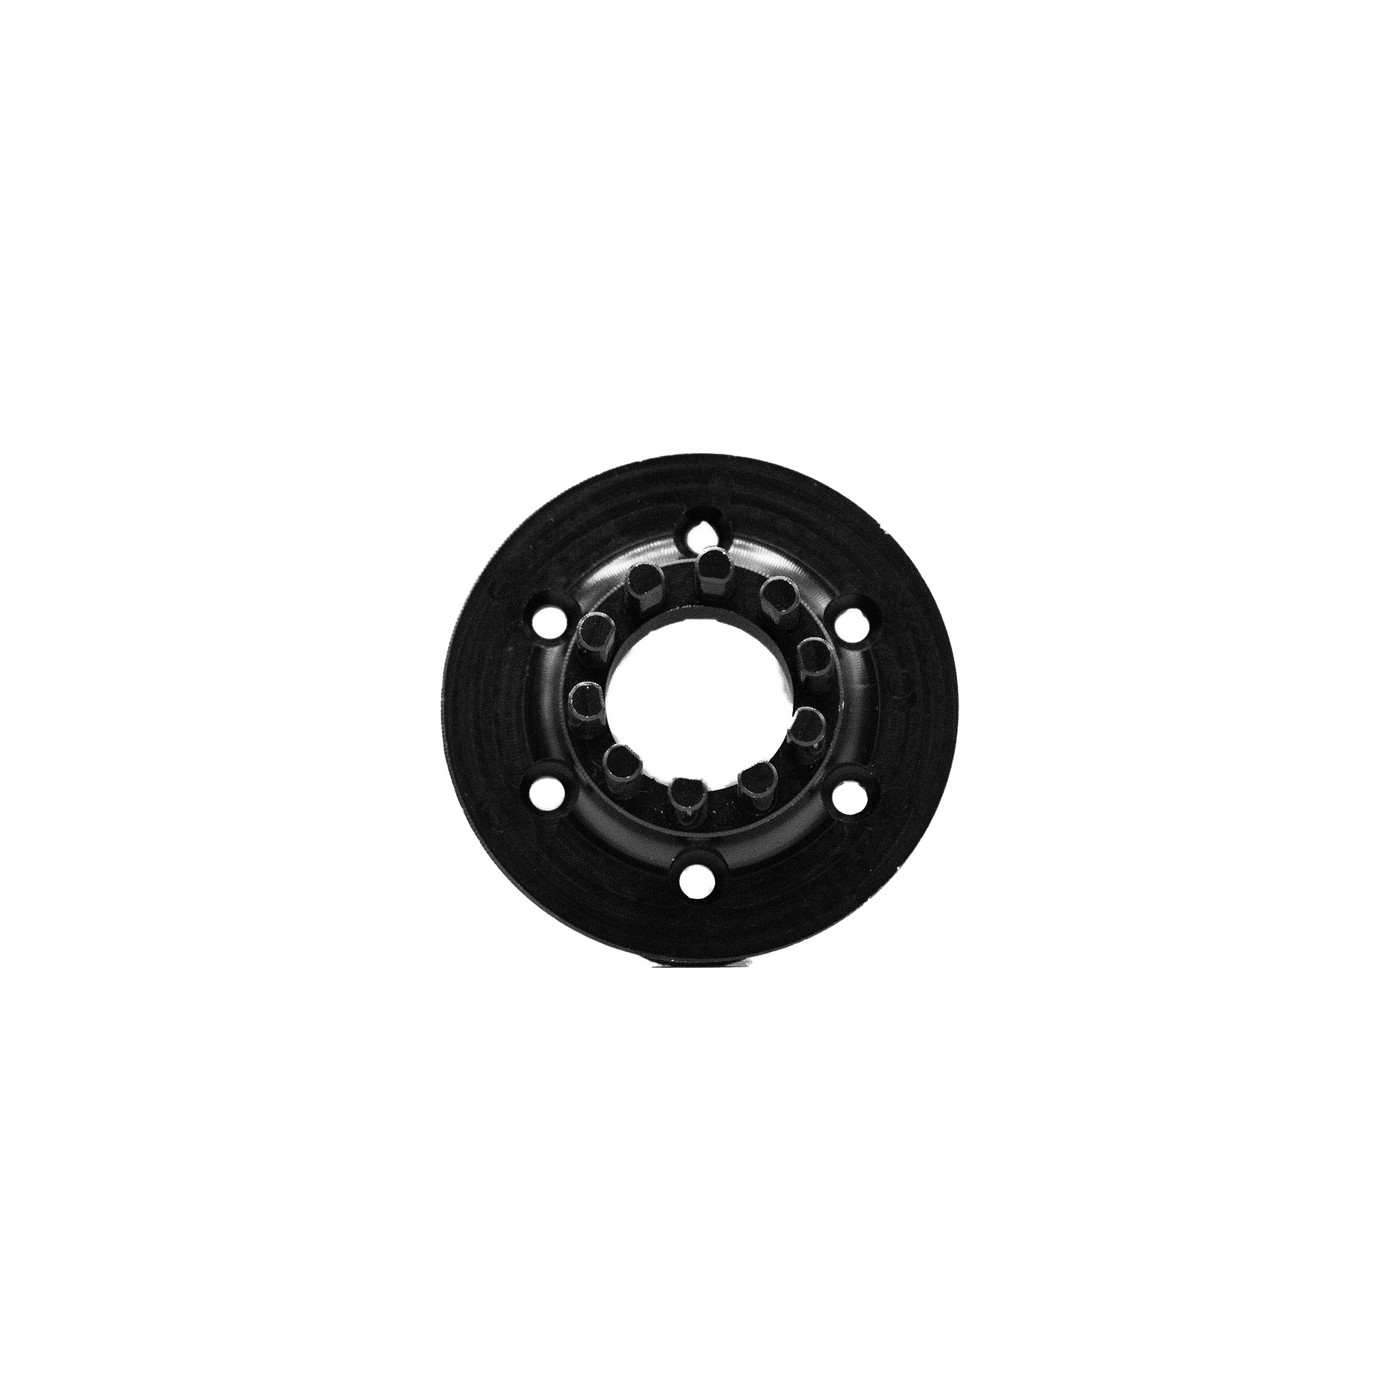 Sex Panther Wheel Adapters